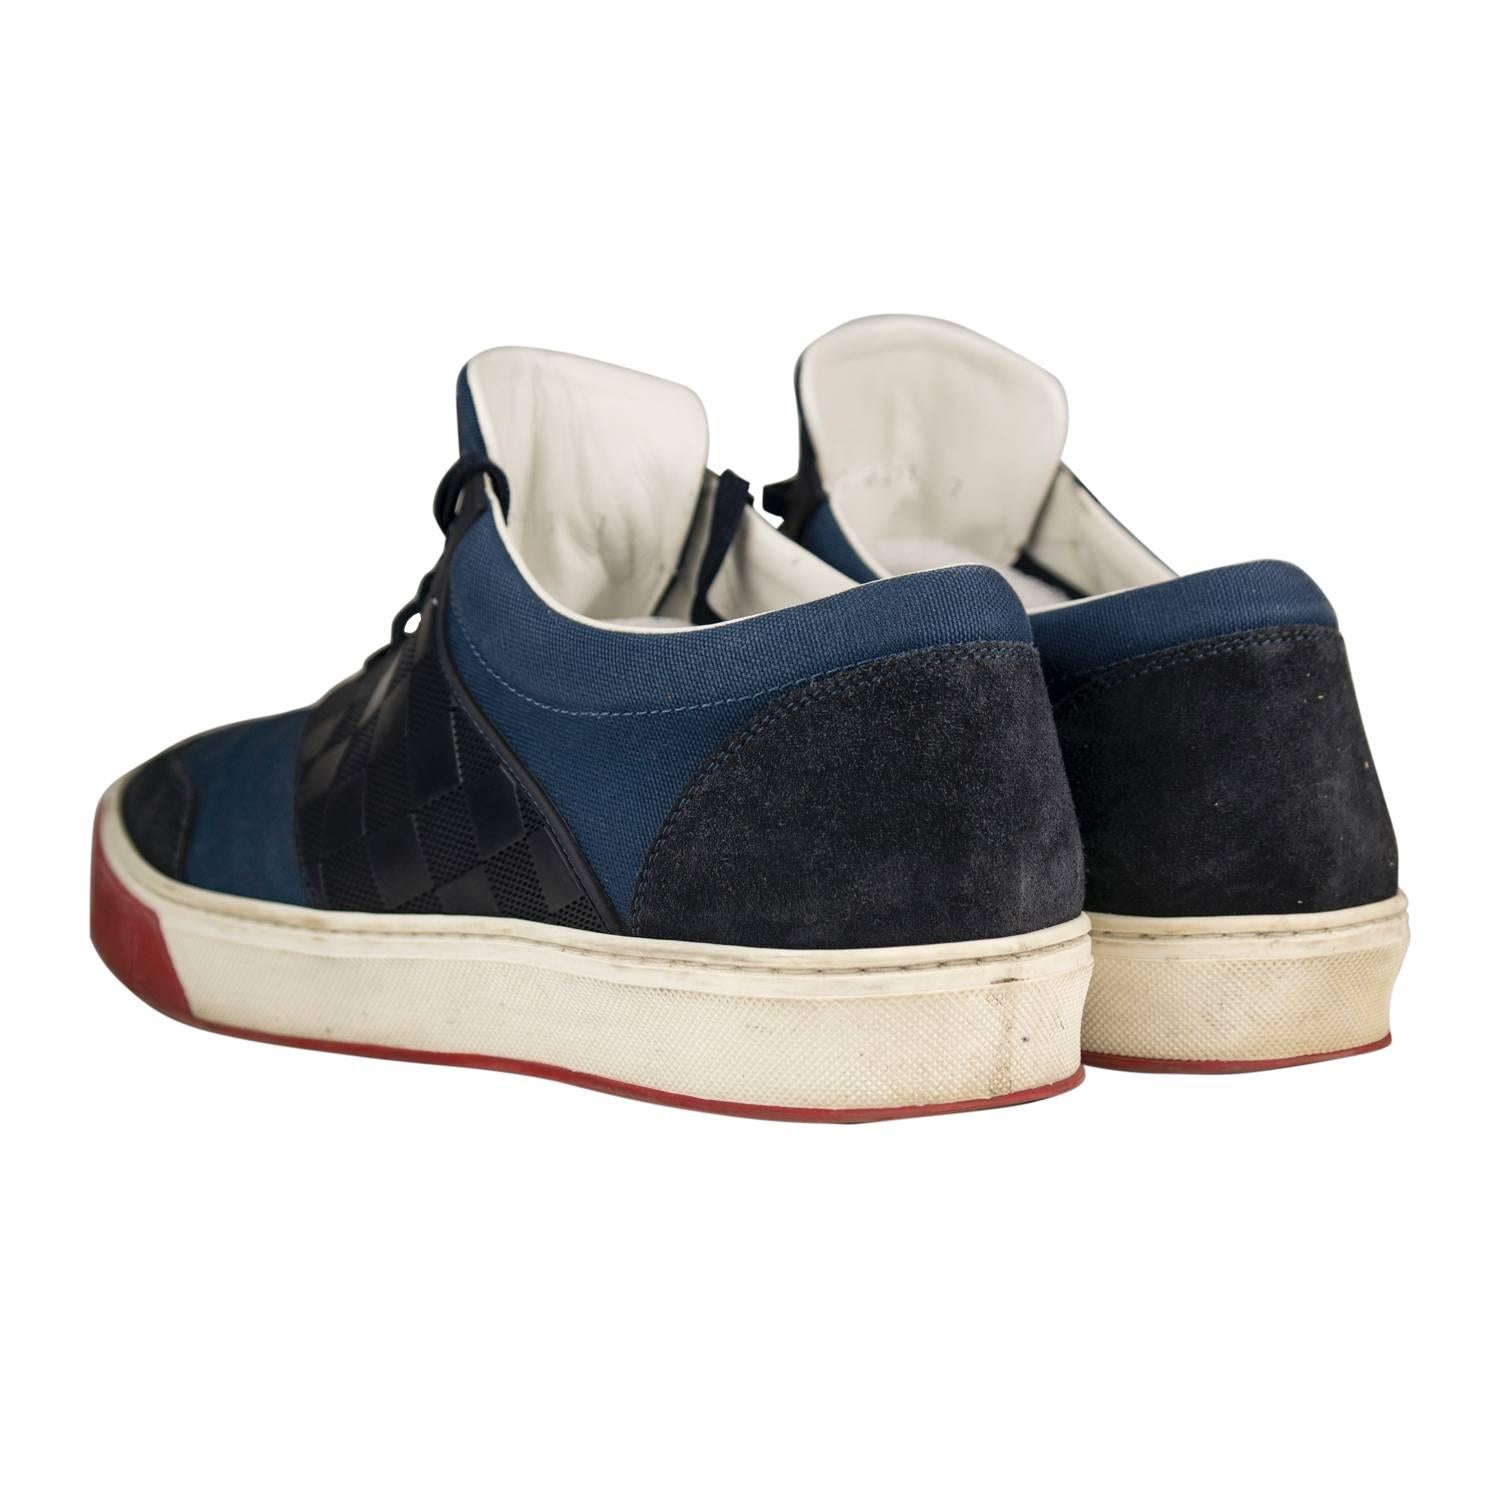 Louis Vuitton Sneakers 40 Blue Black Red 2014.

Pre-owned and used.

Bought it in Louis Vuitton store in 2014.

Composition: Leather.

Size: 40.

Color: Blue Black Red.

Details:

-Shipment and Insurance, 100% Safe.

-Secure payment